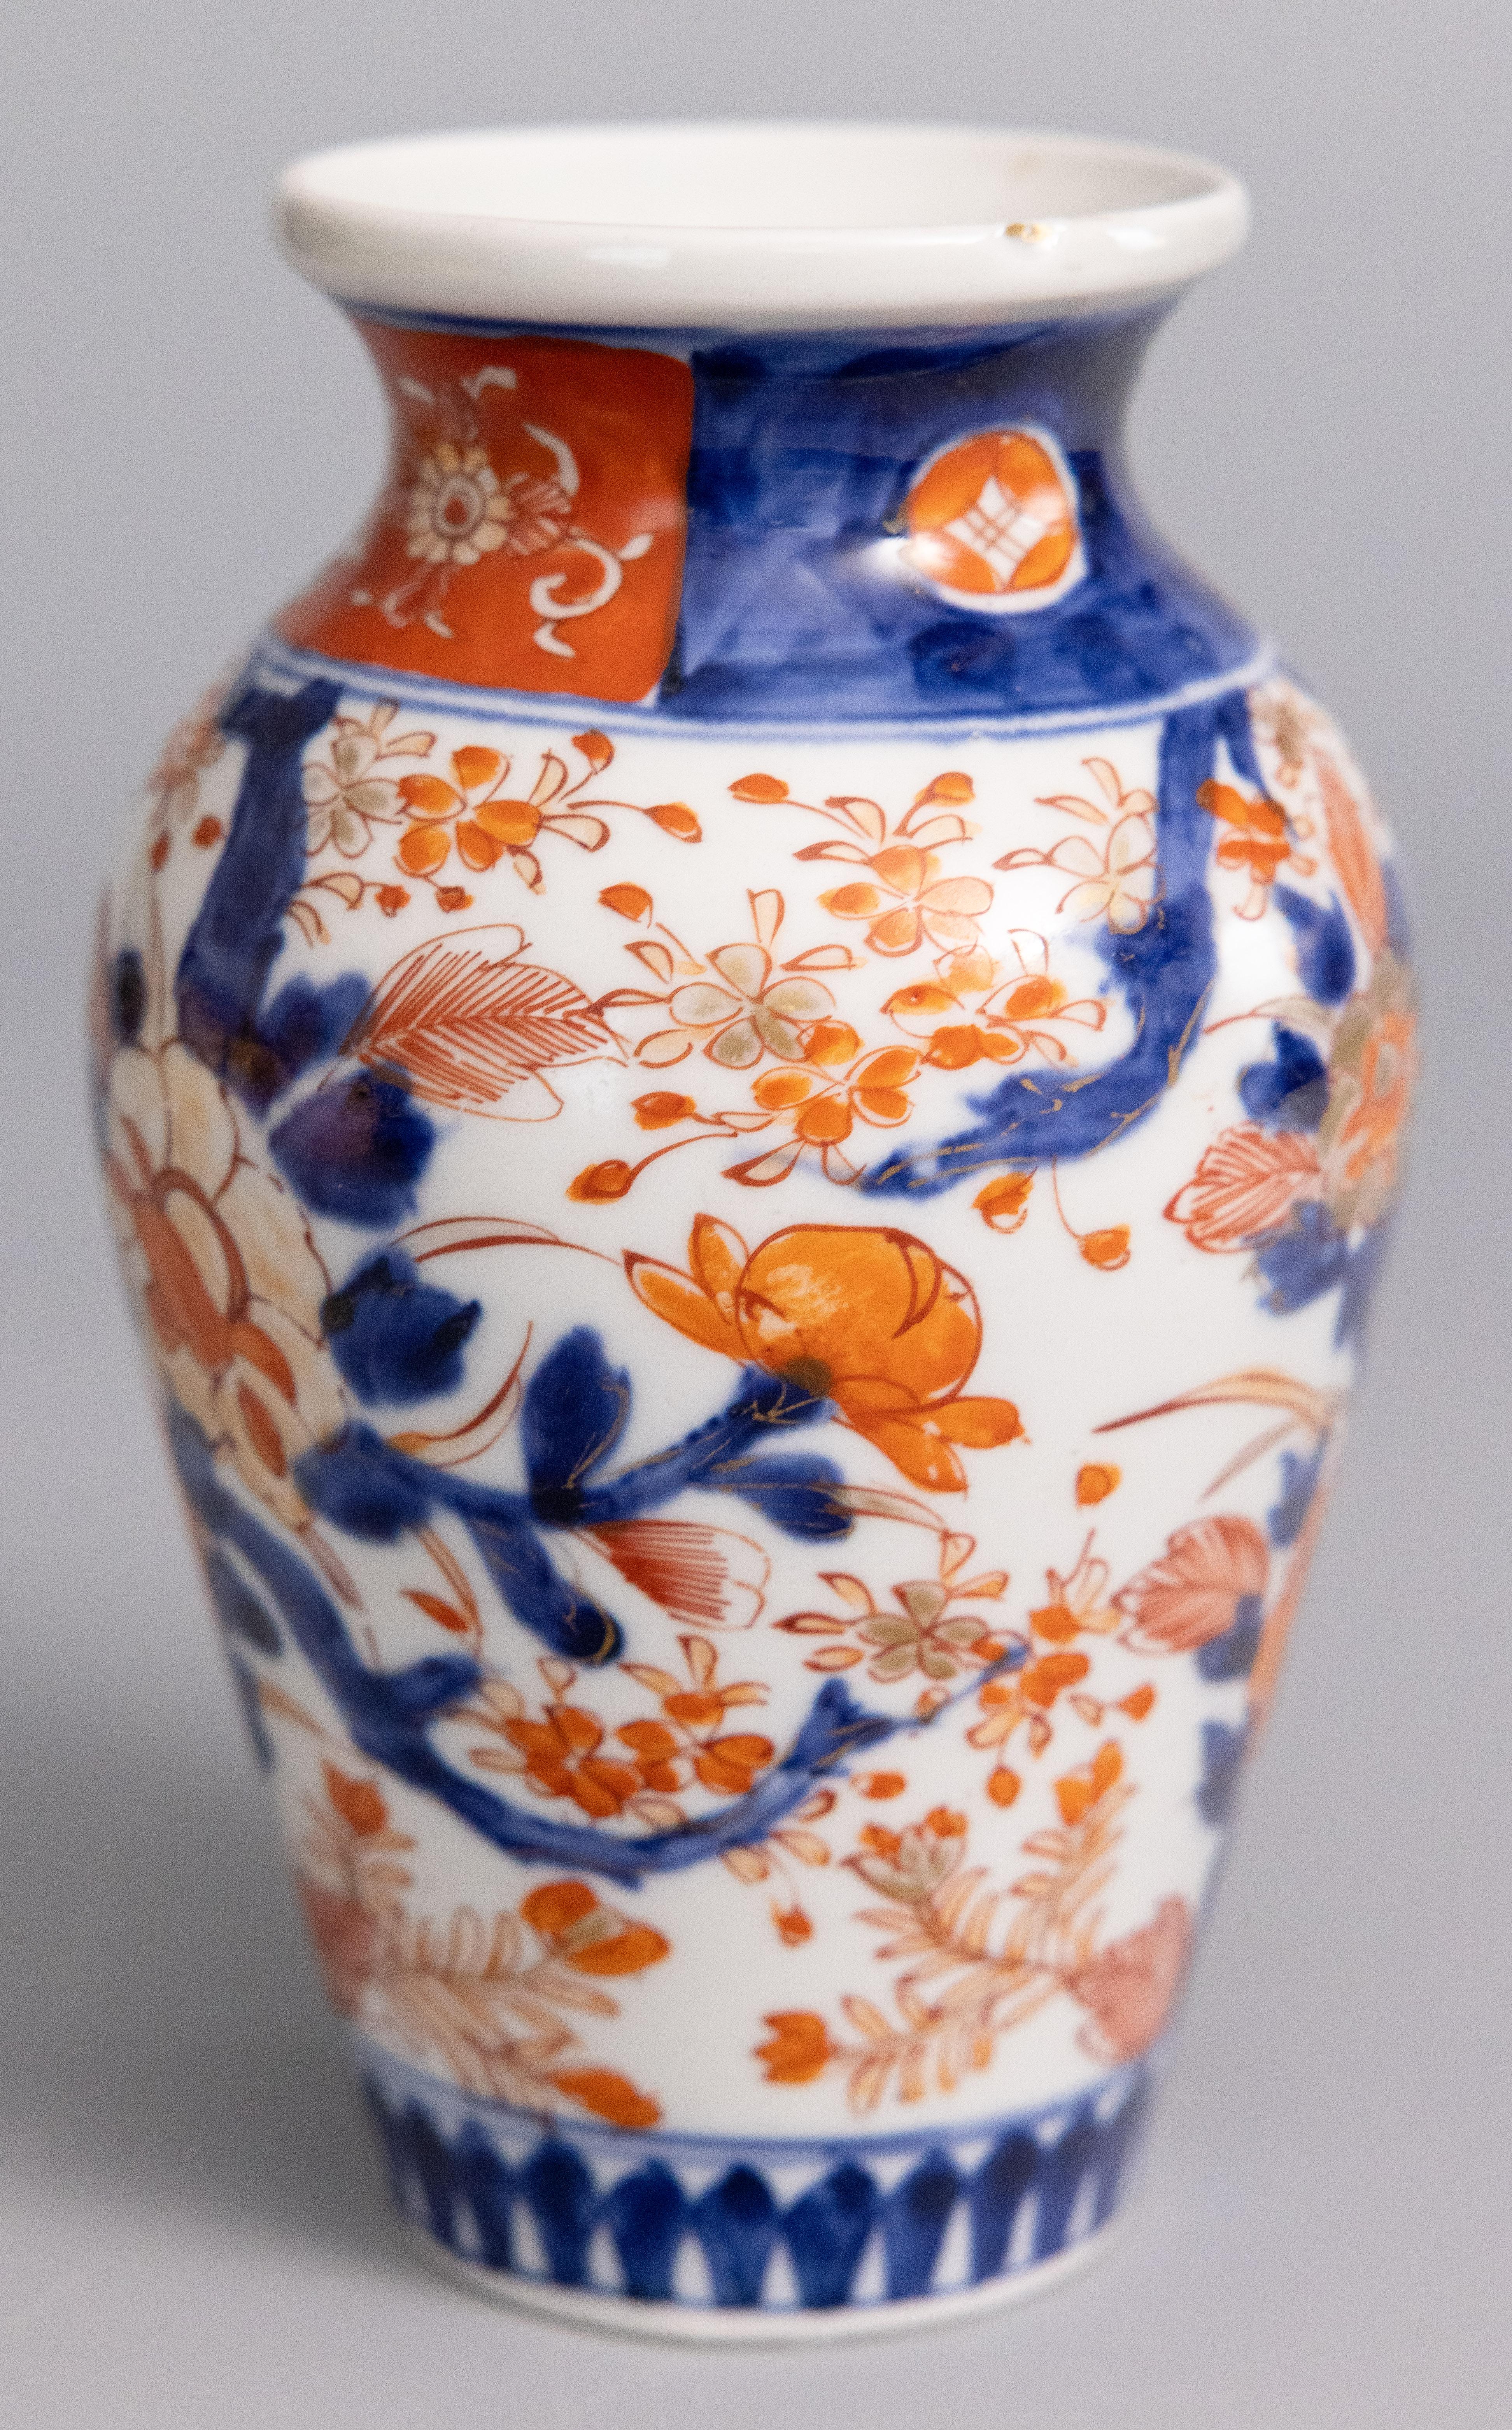 19th-Century Japanese Imari porcelain vase. This fine vase have a lovely shape and hand painted floral designs in the traditional Imari colors.